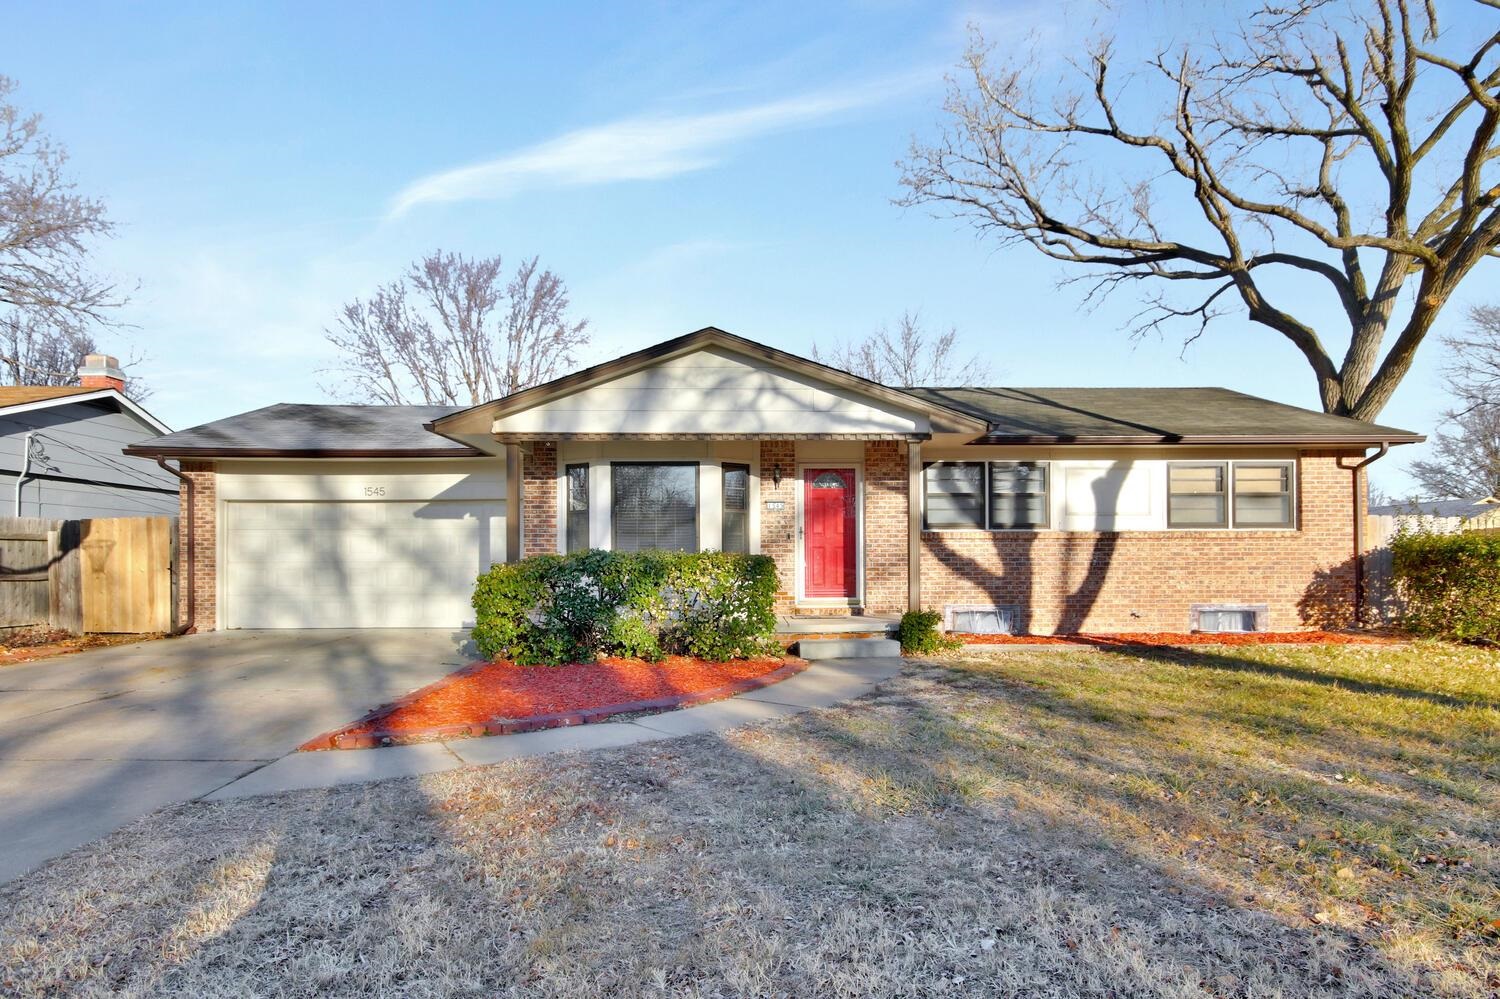 This property is pending just waiting on relocation to sign off. Very clean and move in ready!! This property features 3 bedrooms, 1 1/2 baths, full basement, 2 car garage with a covered deck on a corner lot.